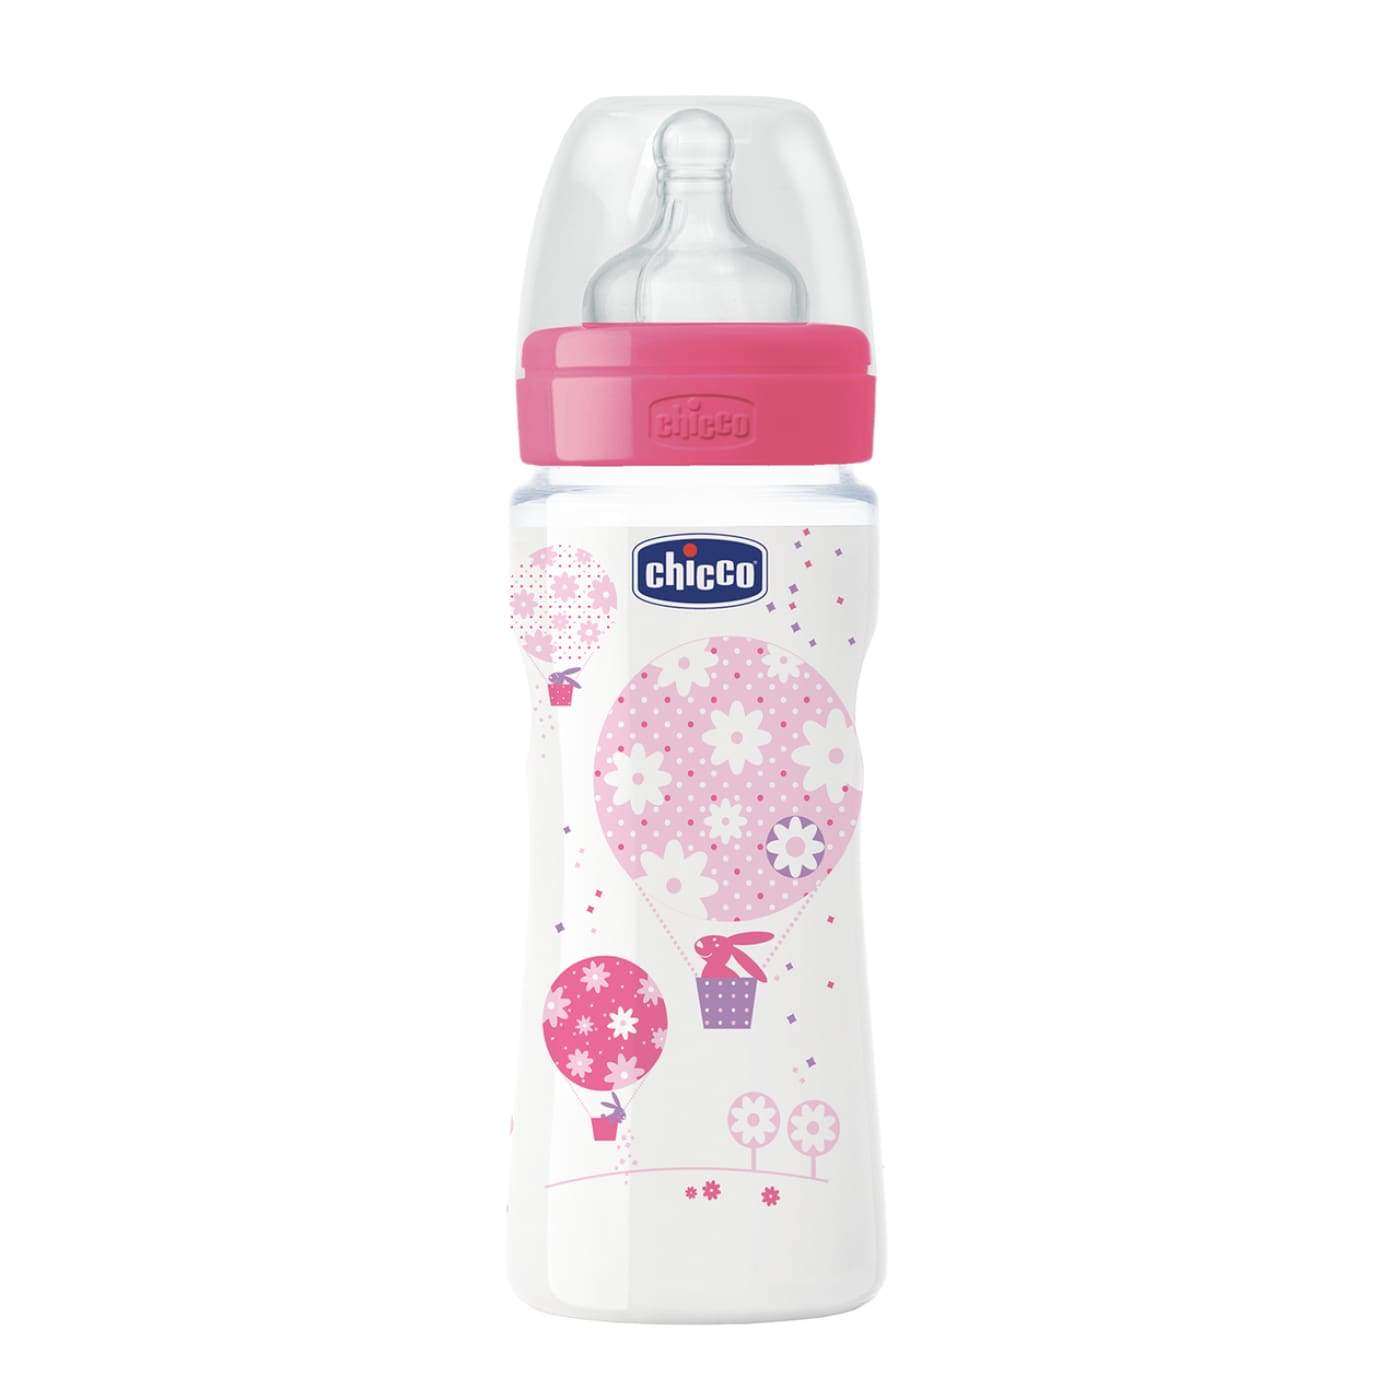 Chicco biberon well-being - 330ml - tétine silicone - rose 4 mois +